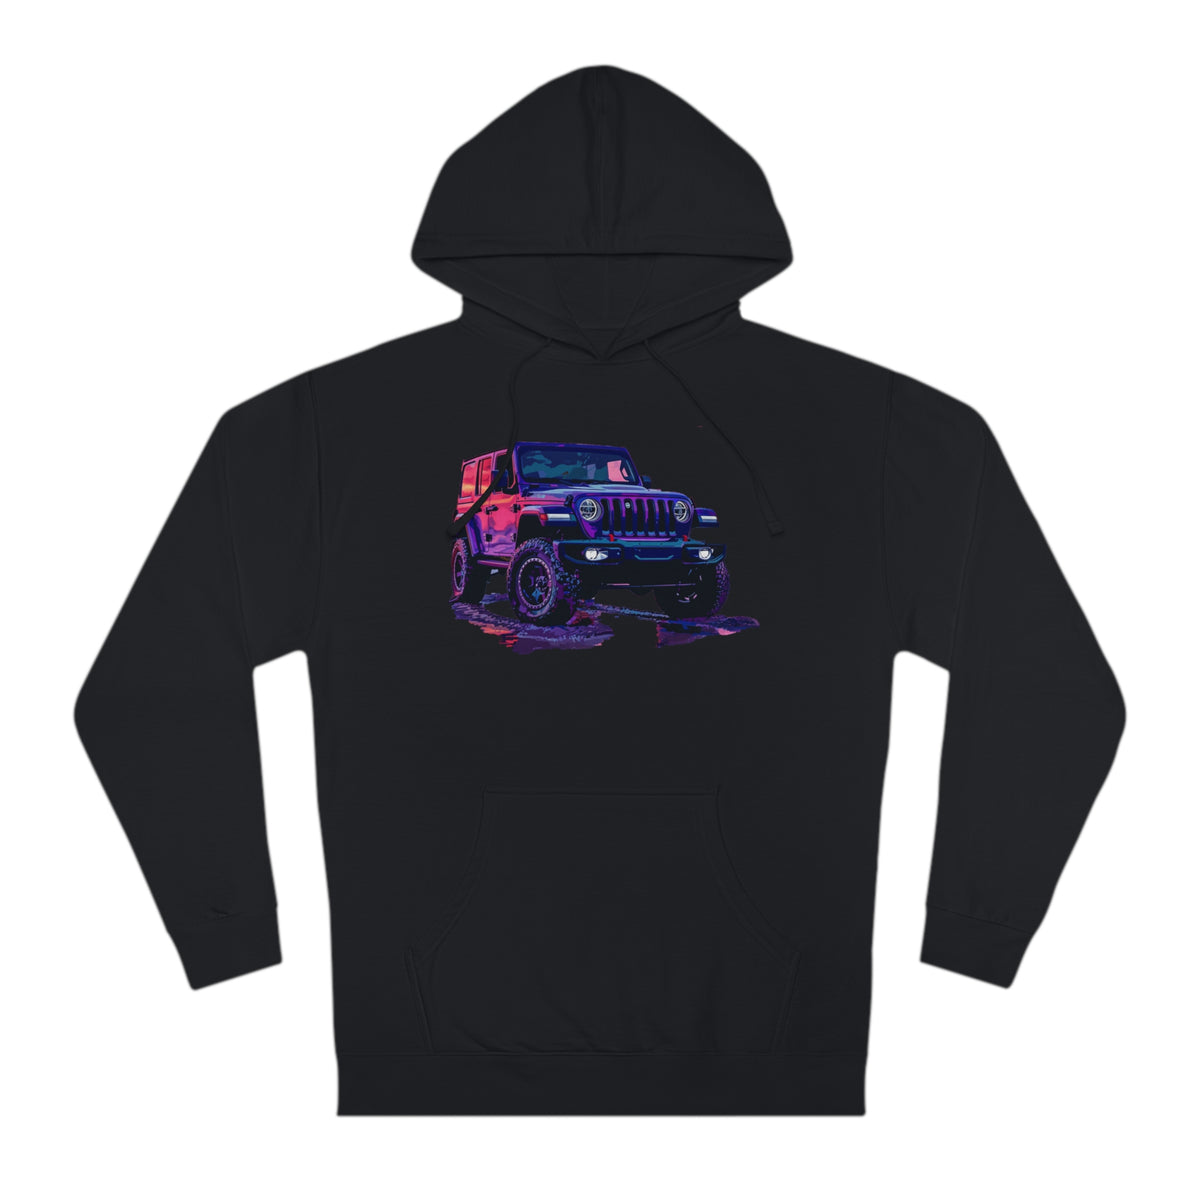 Vibrant Voyager Men's Hoodie with Psychedelic Jeep Graphic Hooded Sweatshirt